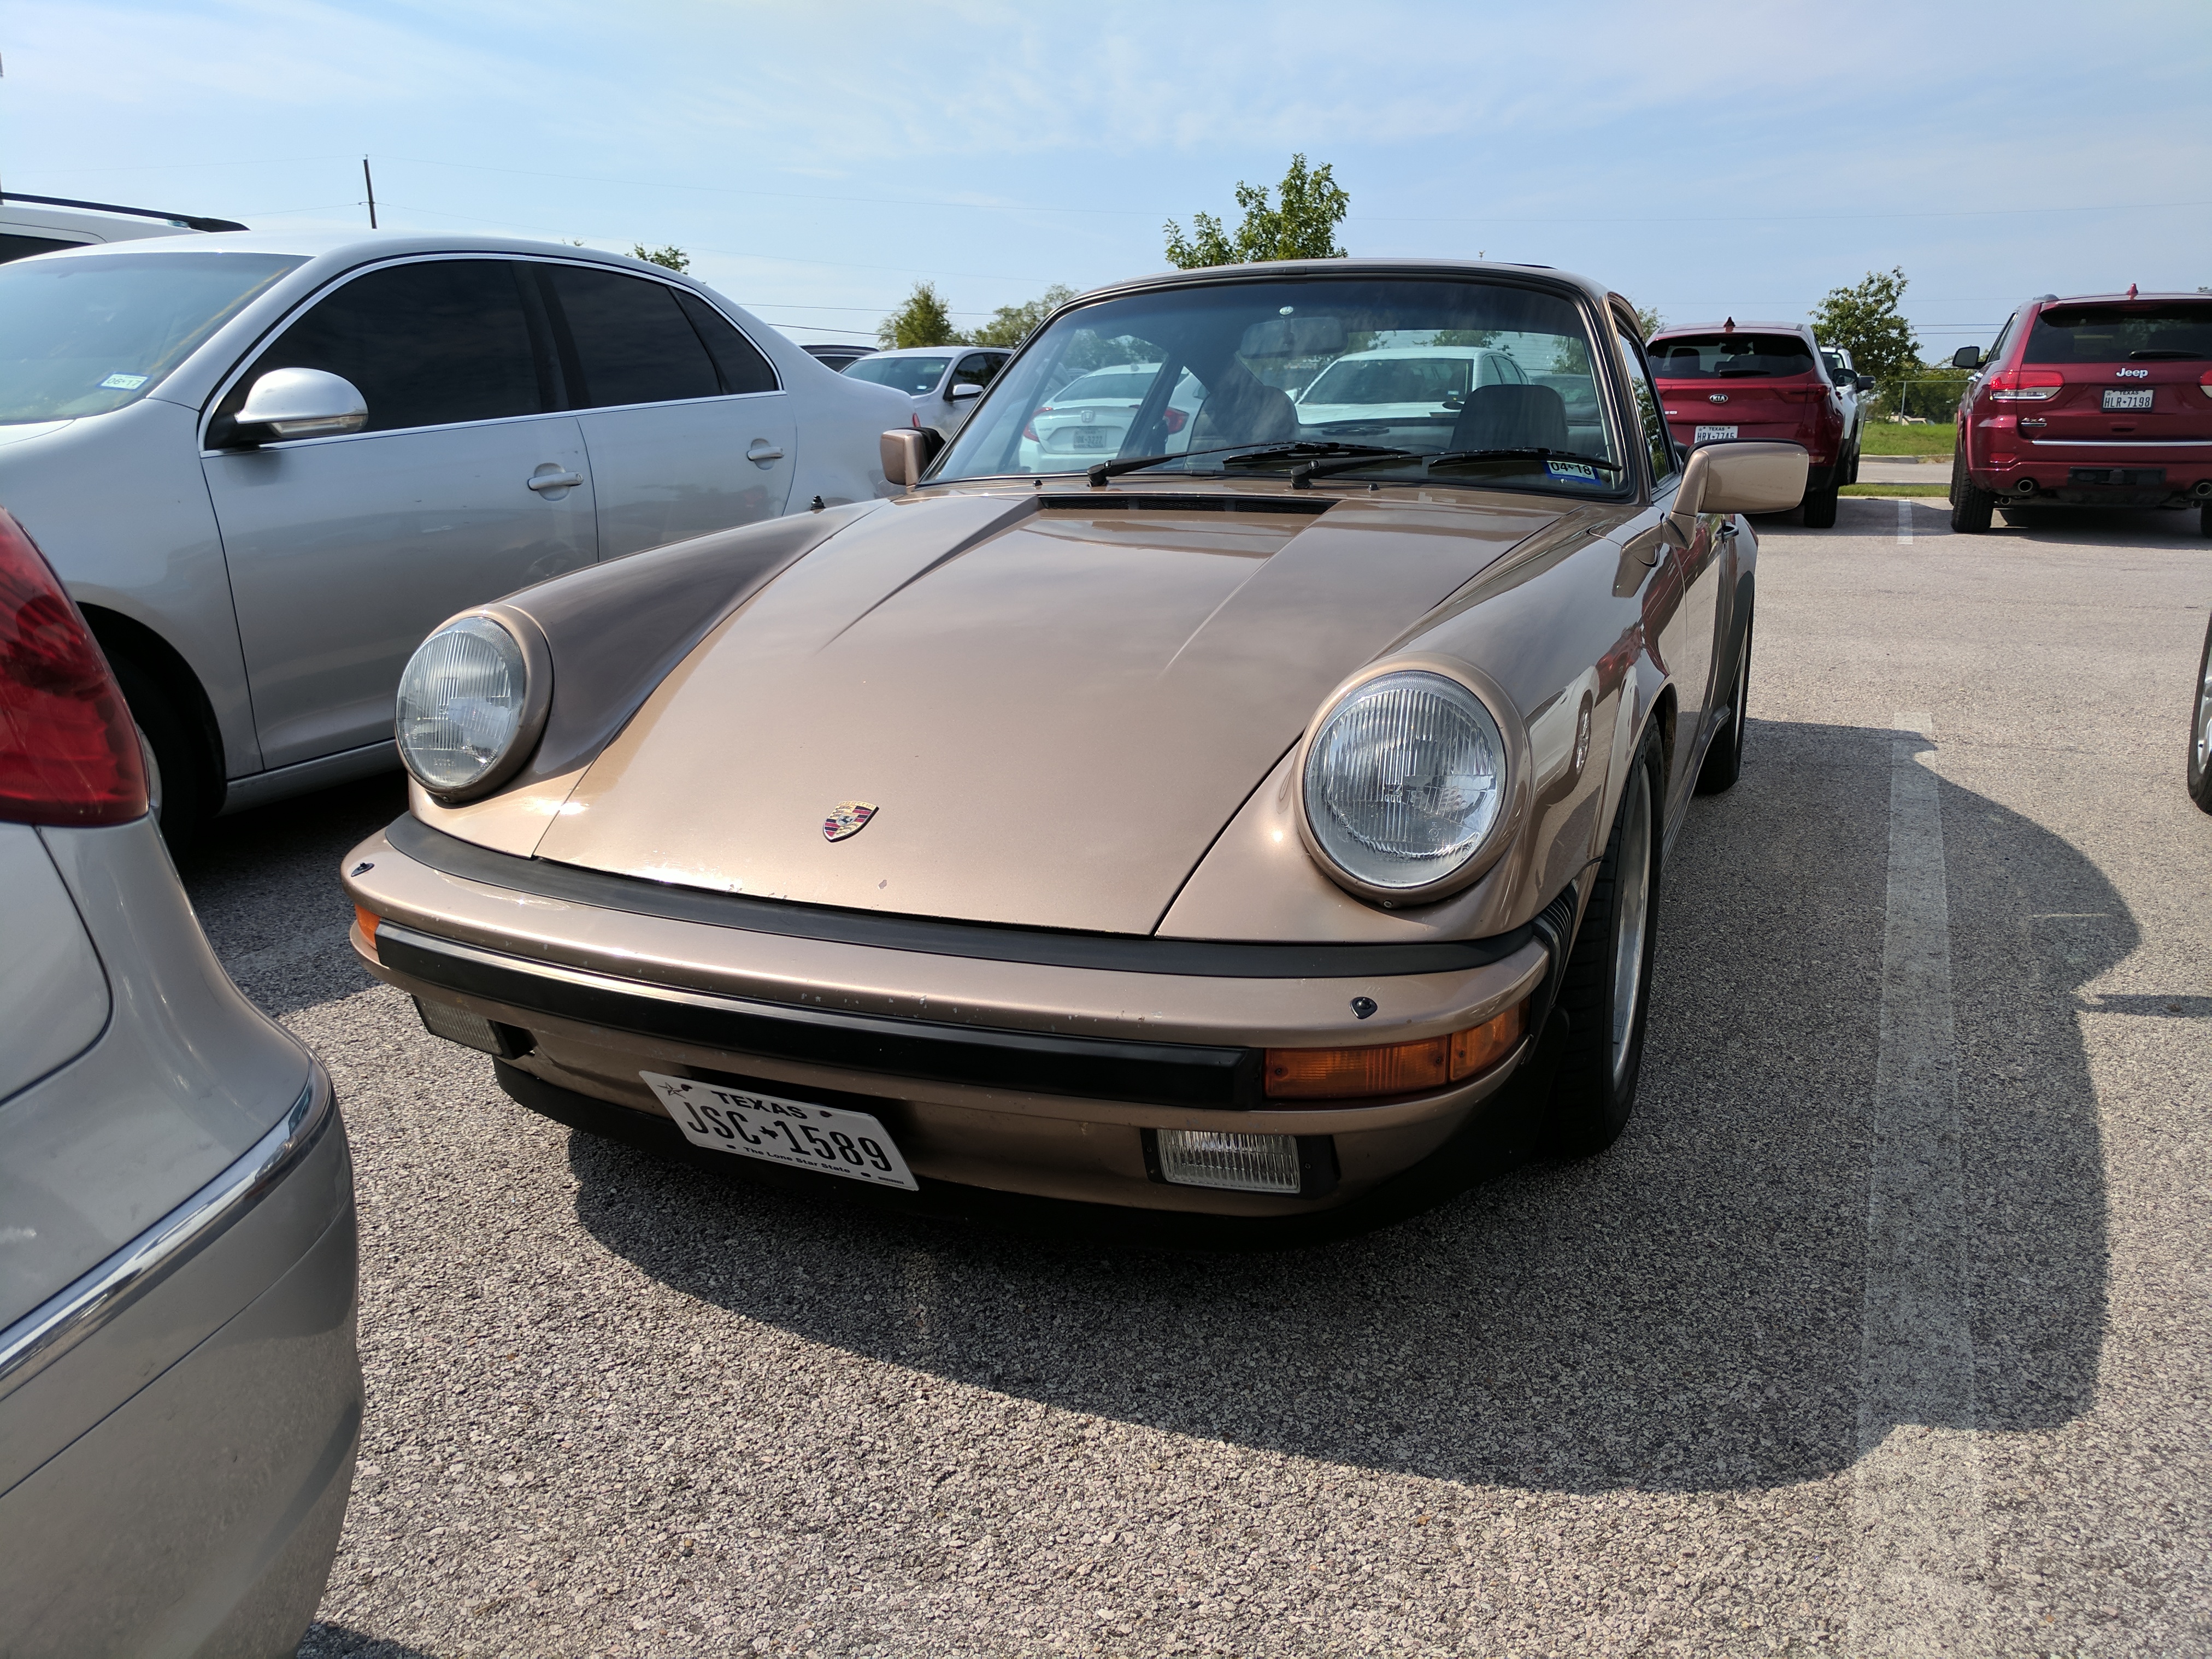 Classic 911 is always a joy to see.